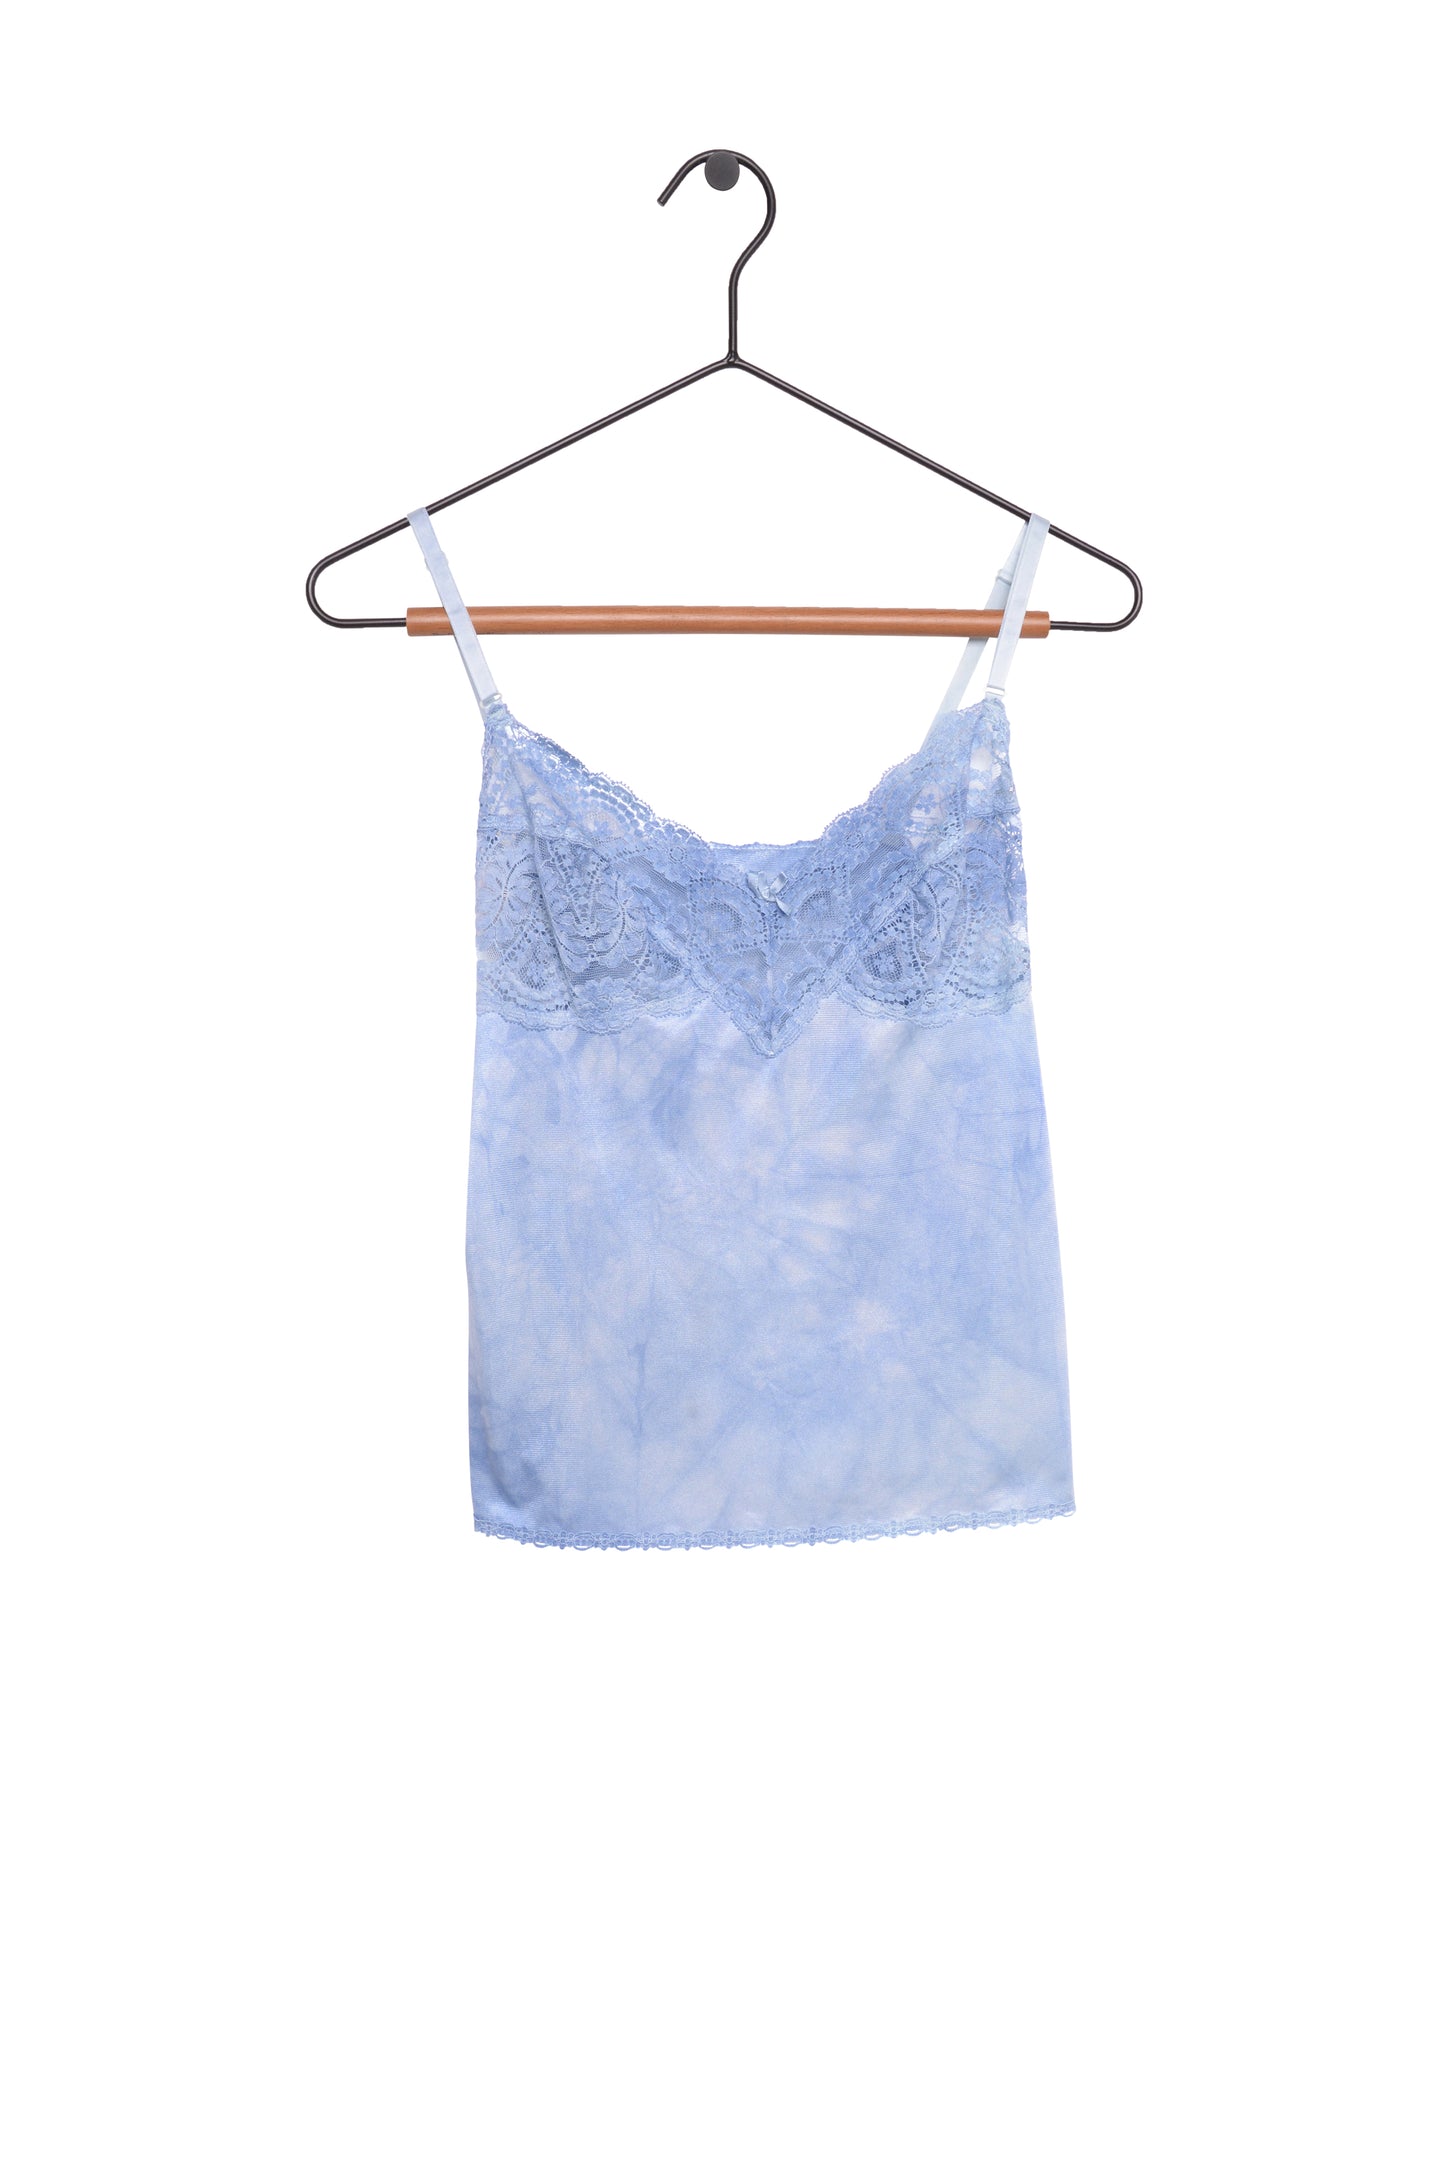 1950s Hand-Dyed Lace Slip Top